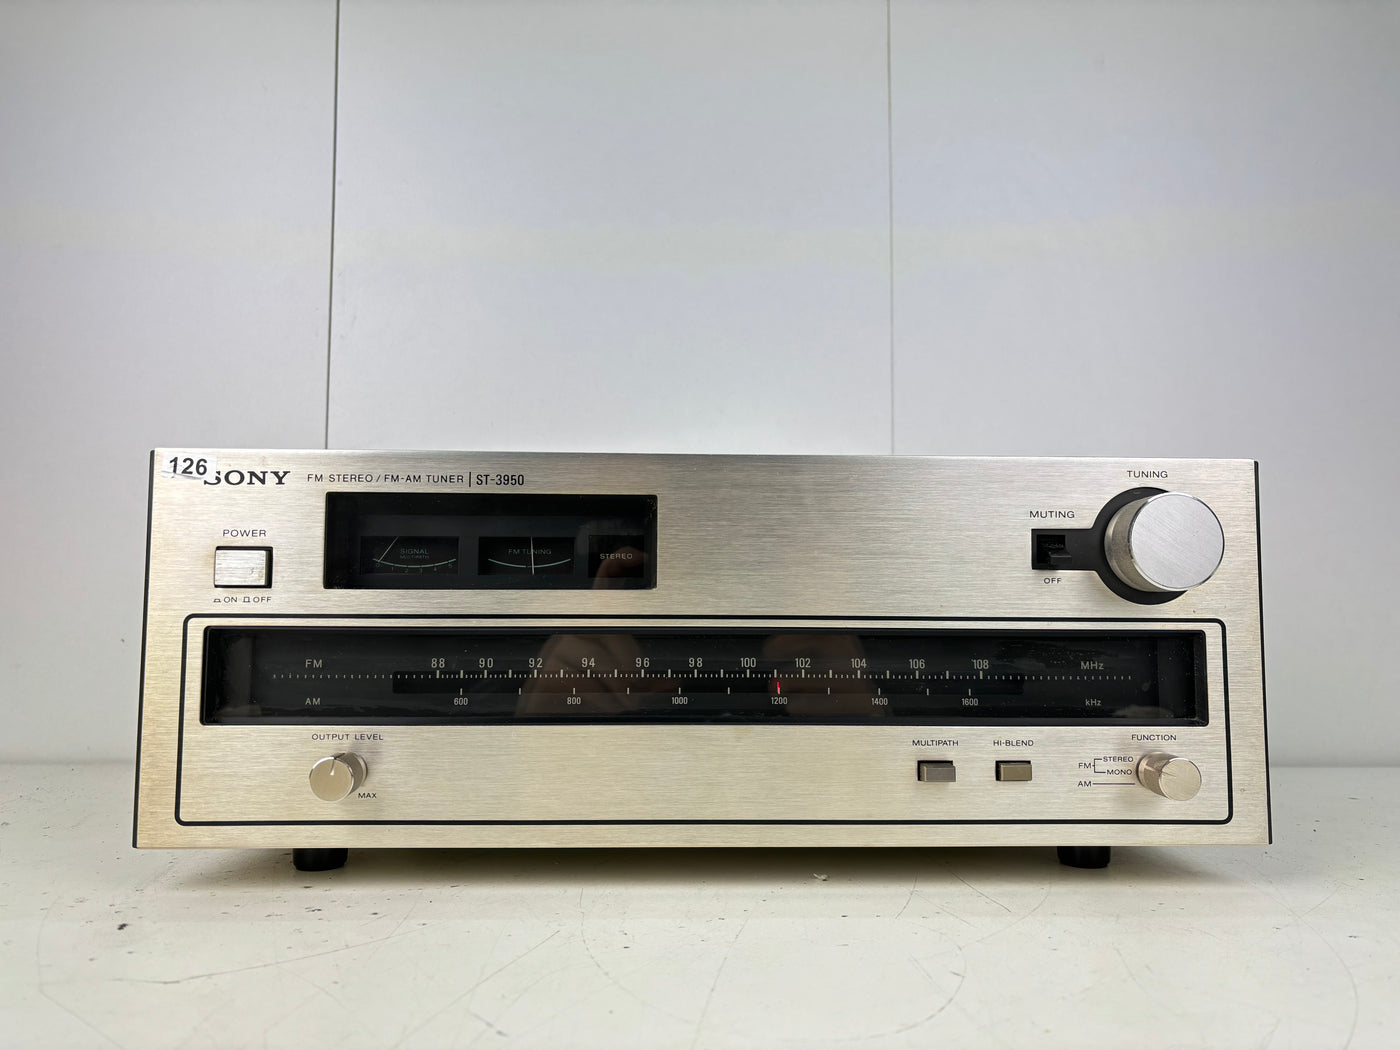 Sony ST-3950 FM/AM Stereo Tuner